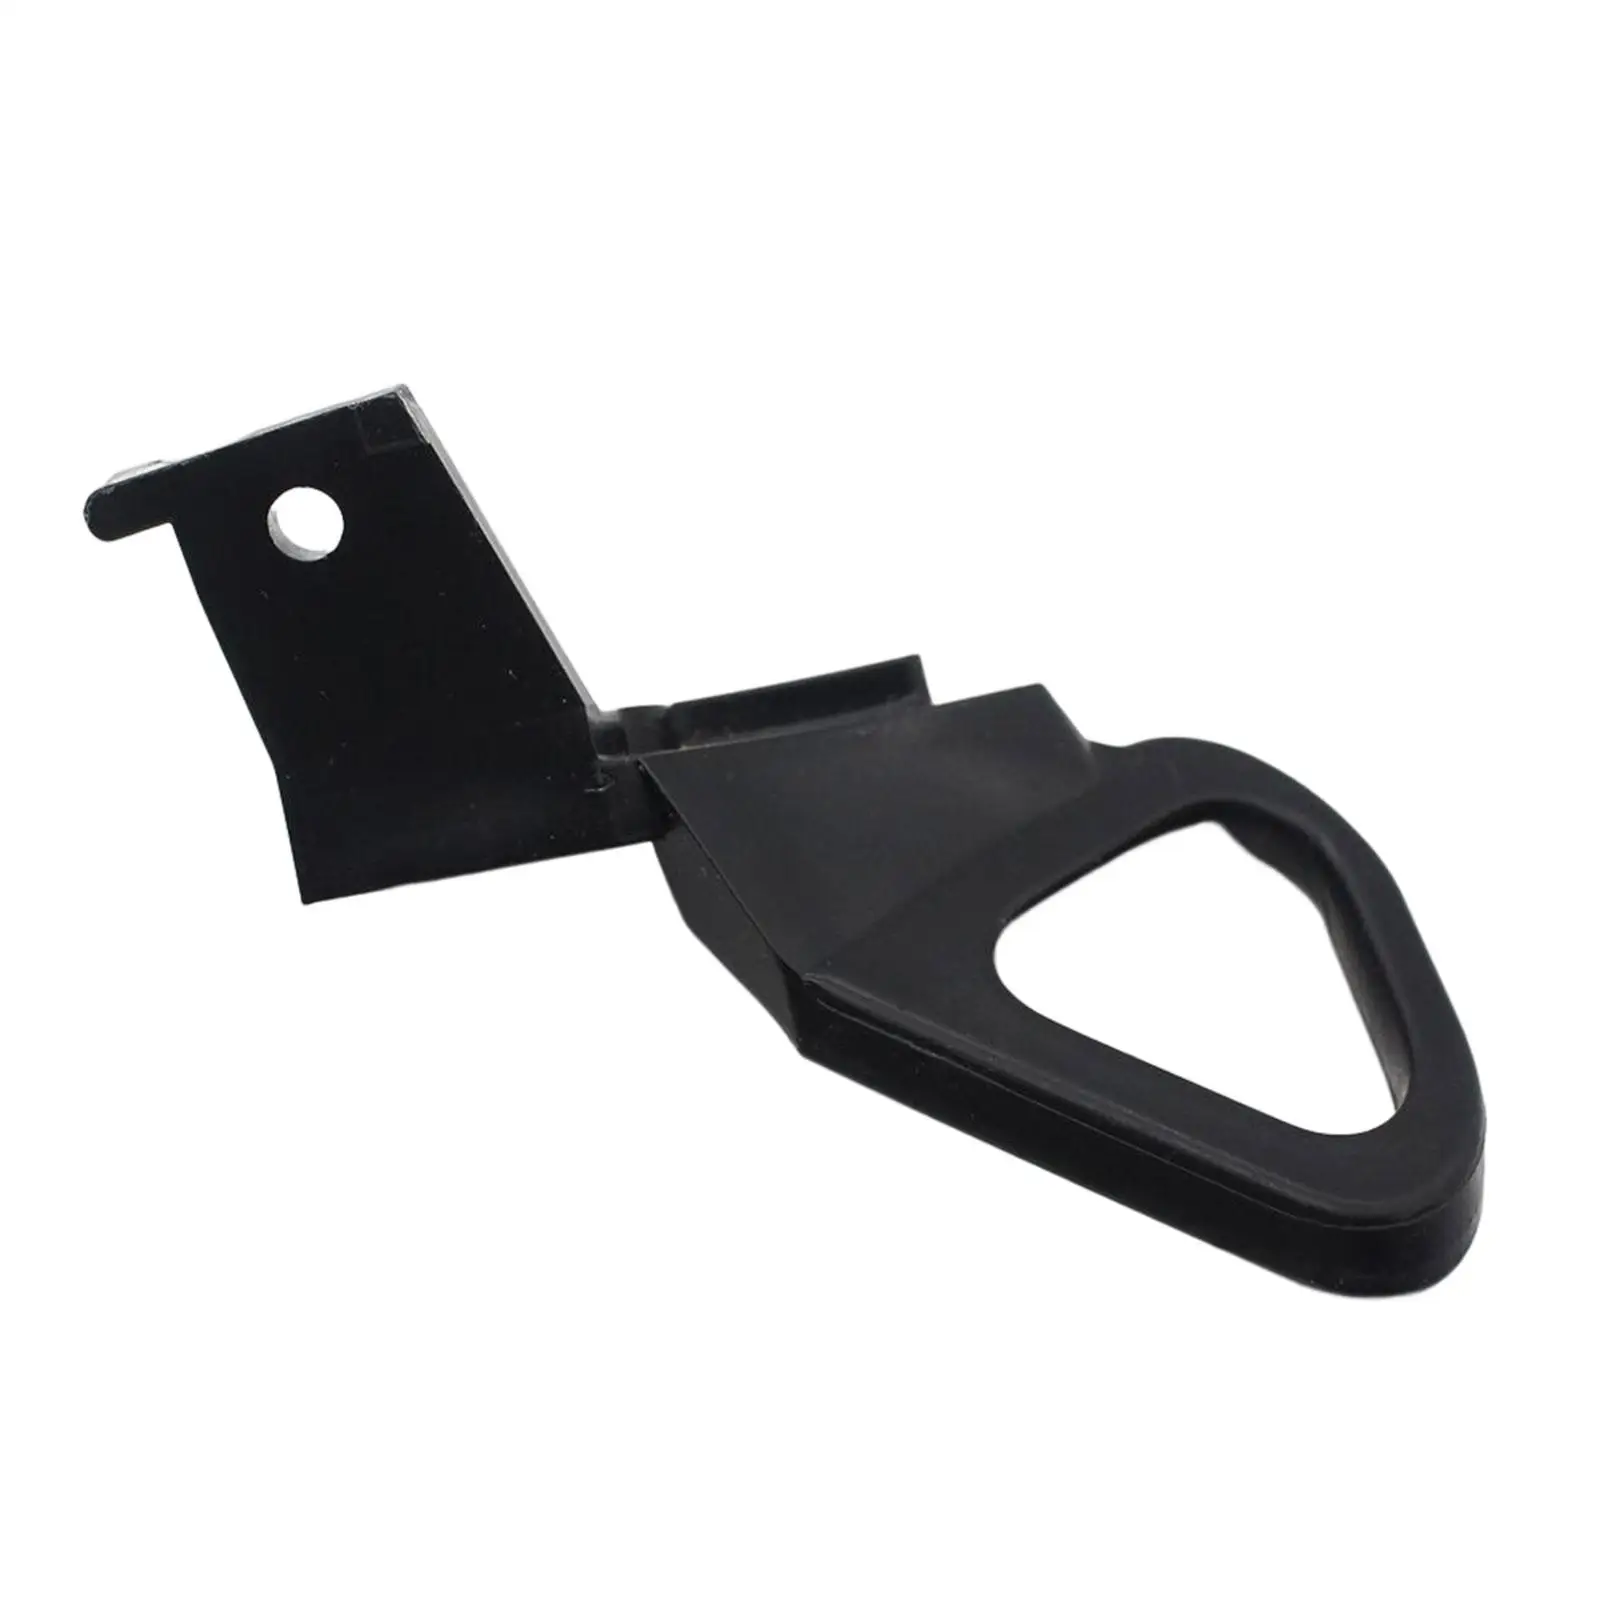 Oil Cup Fixed Bracket Cover Replaces Motorcycle Accessories Spare Parts Aluminum